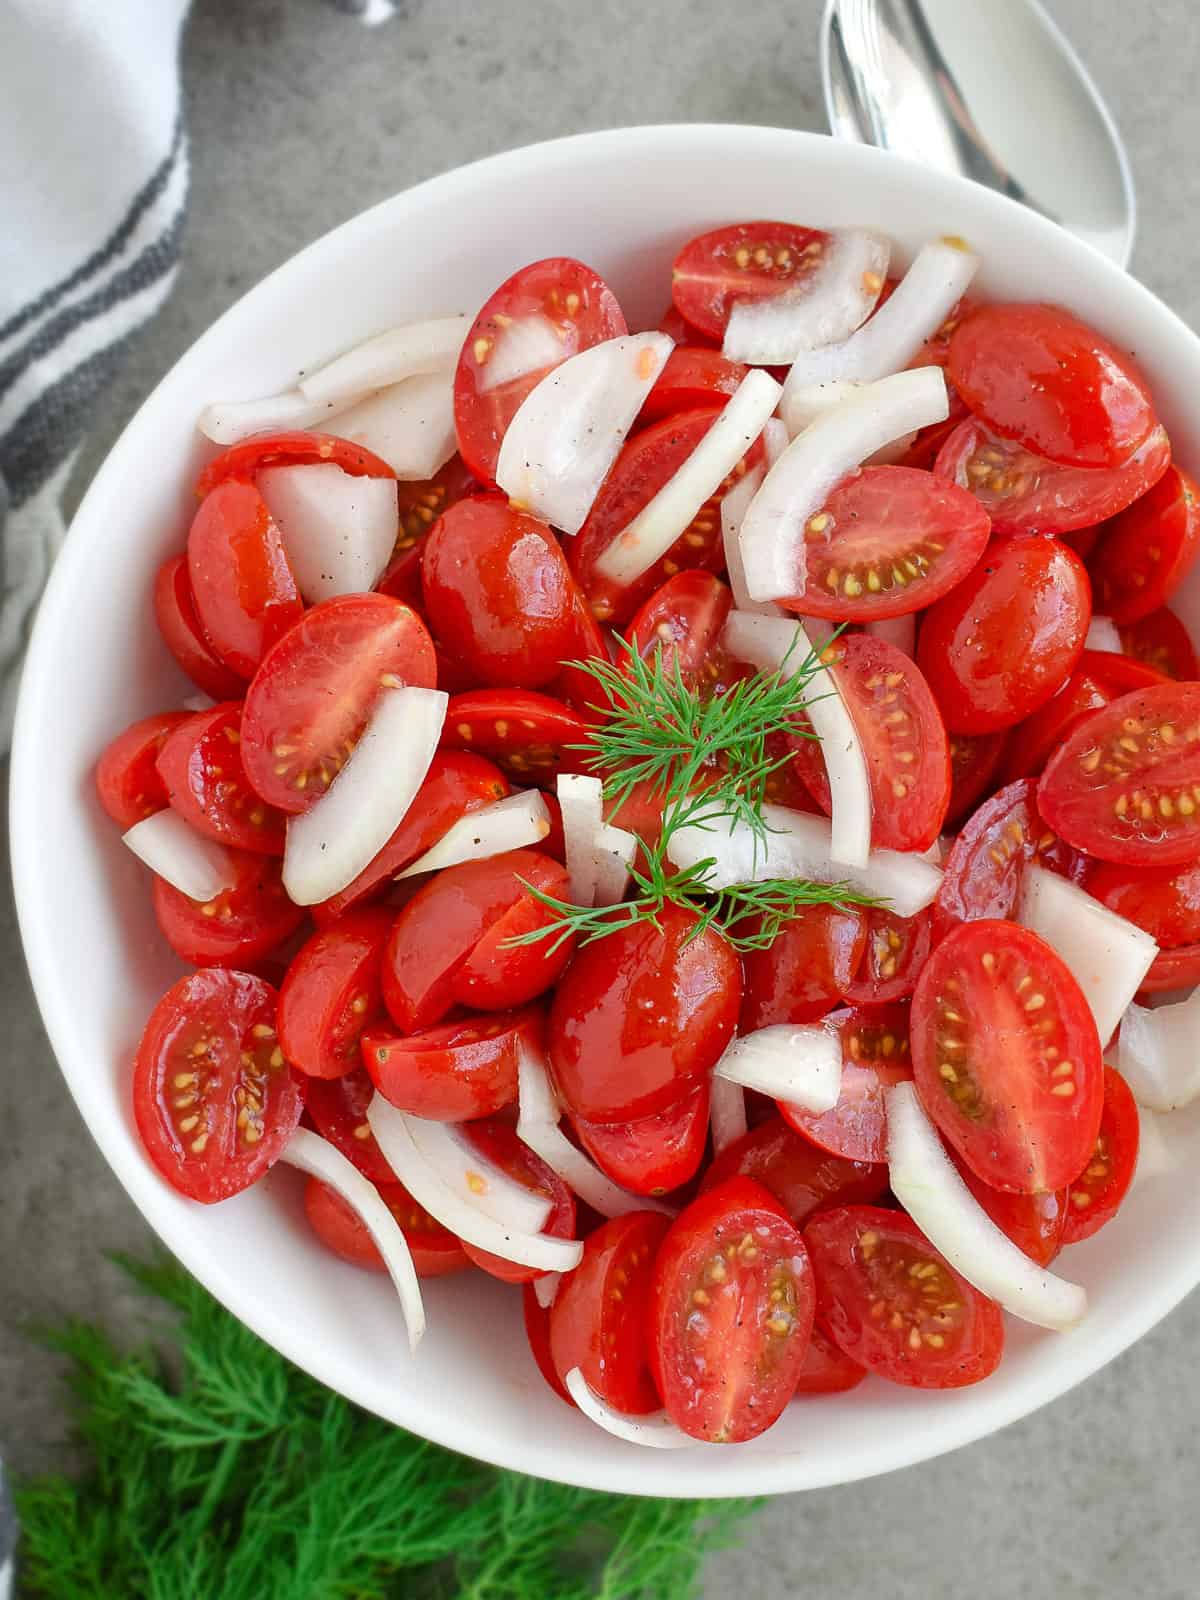 Delicious and Very Simple Tomato Snack